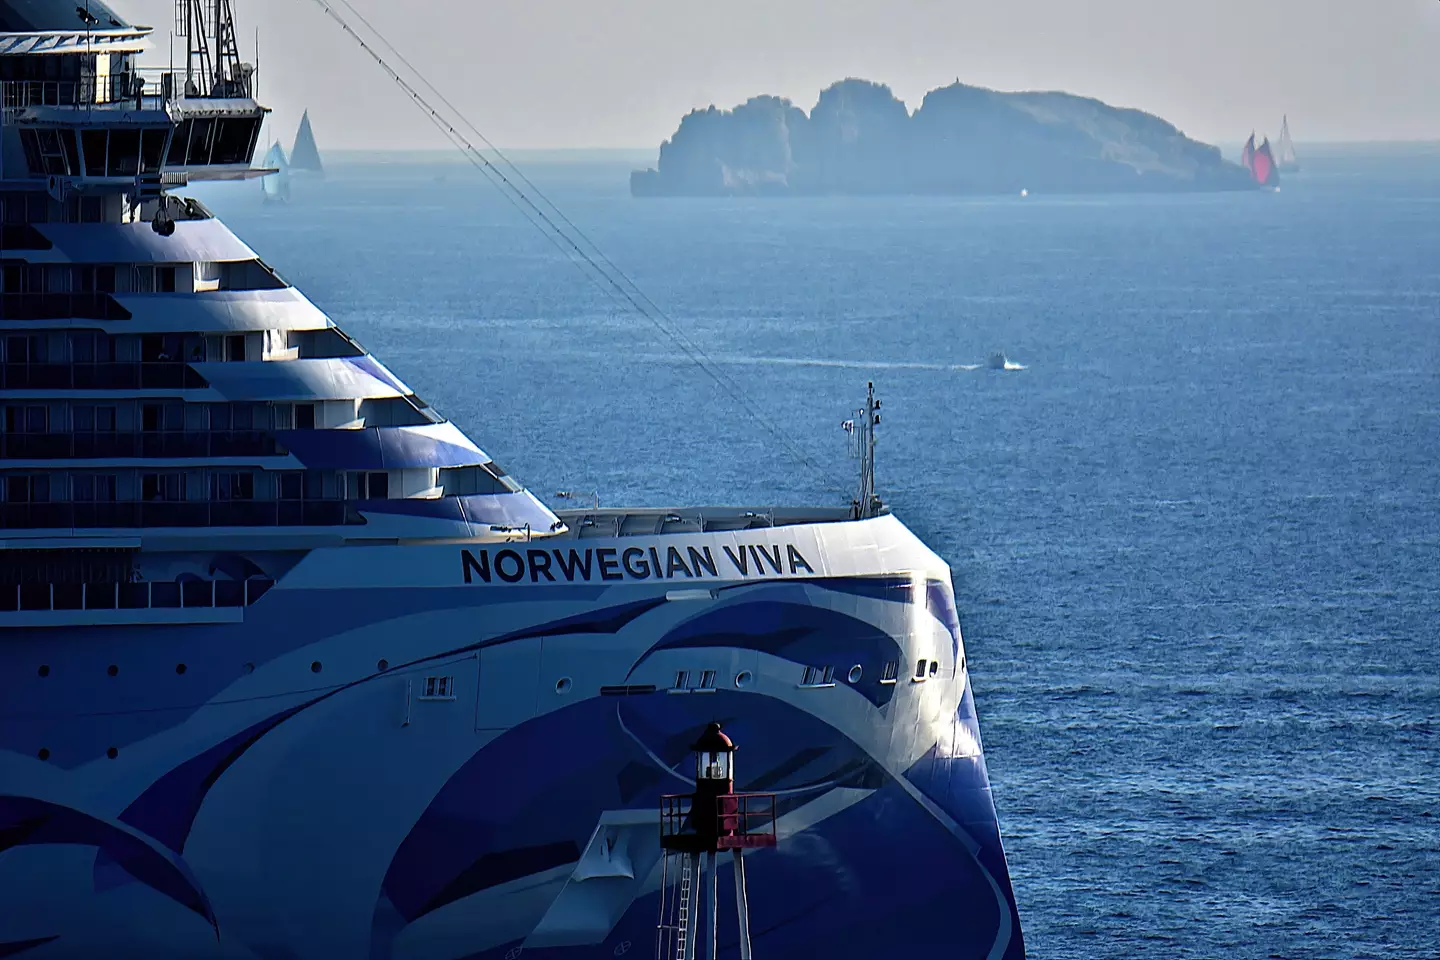 The Norwegian Cruise Line ship departed bang on time. (Gerard Bottino/SOPA Images/LightRocket via Getty Images)